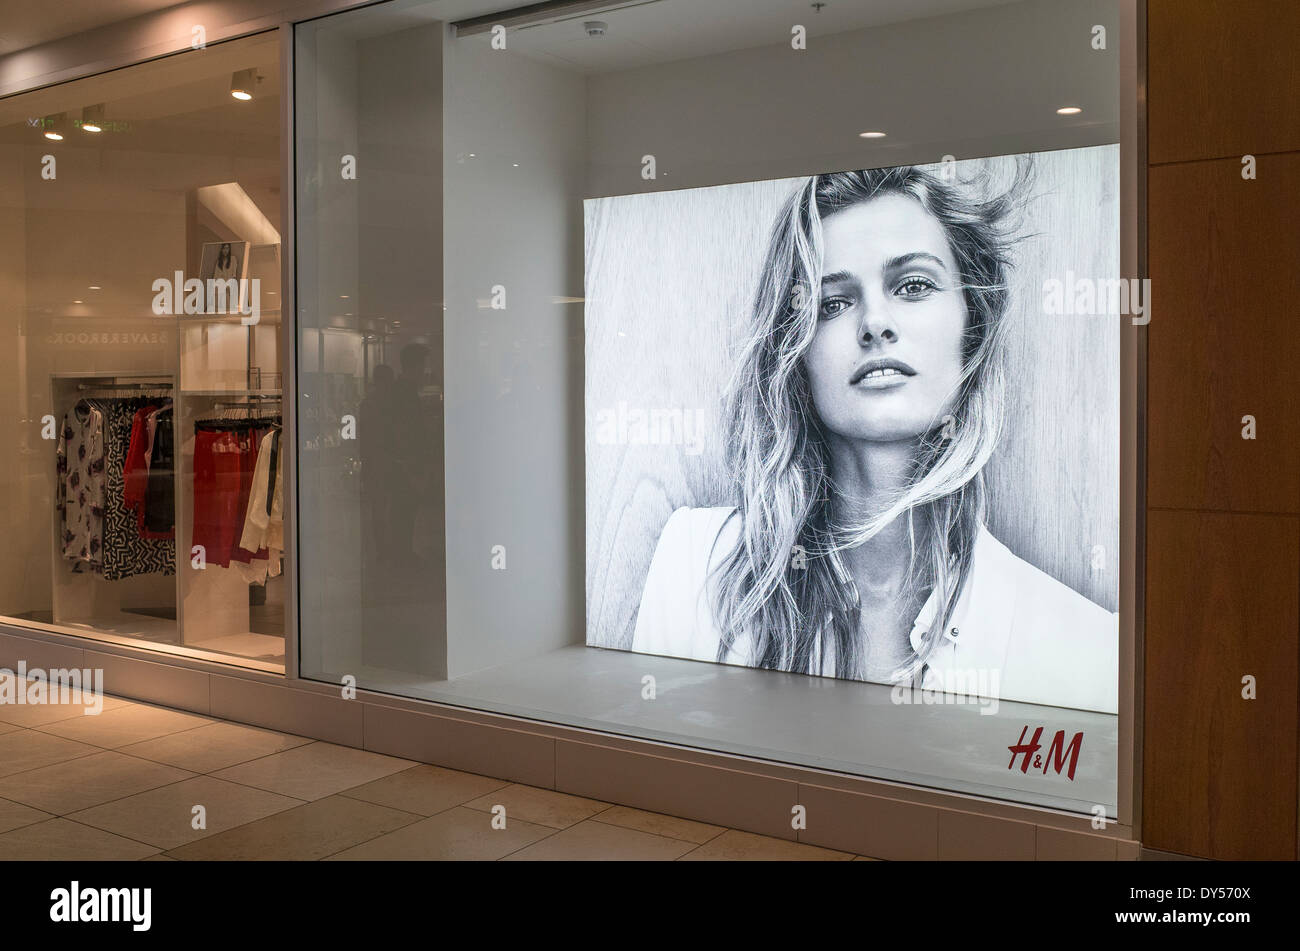 H&M Shop Window Display in Shopping Mall Stock Photo - Alamy